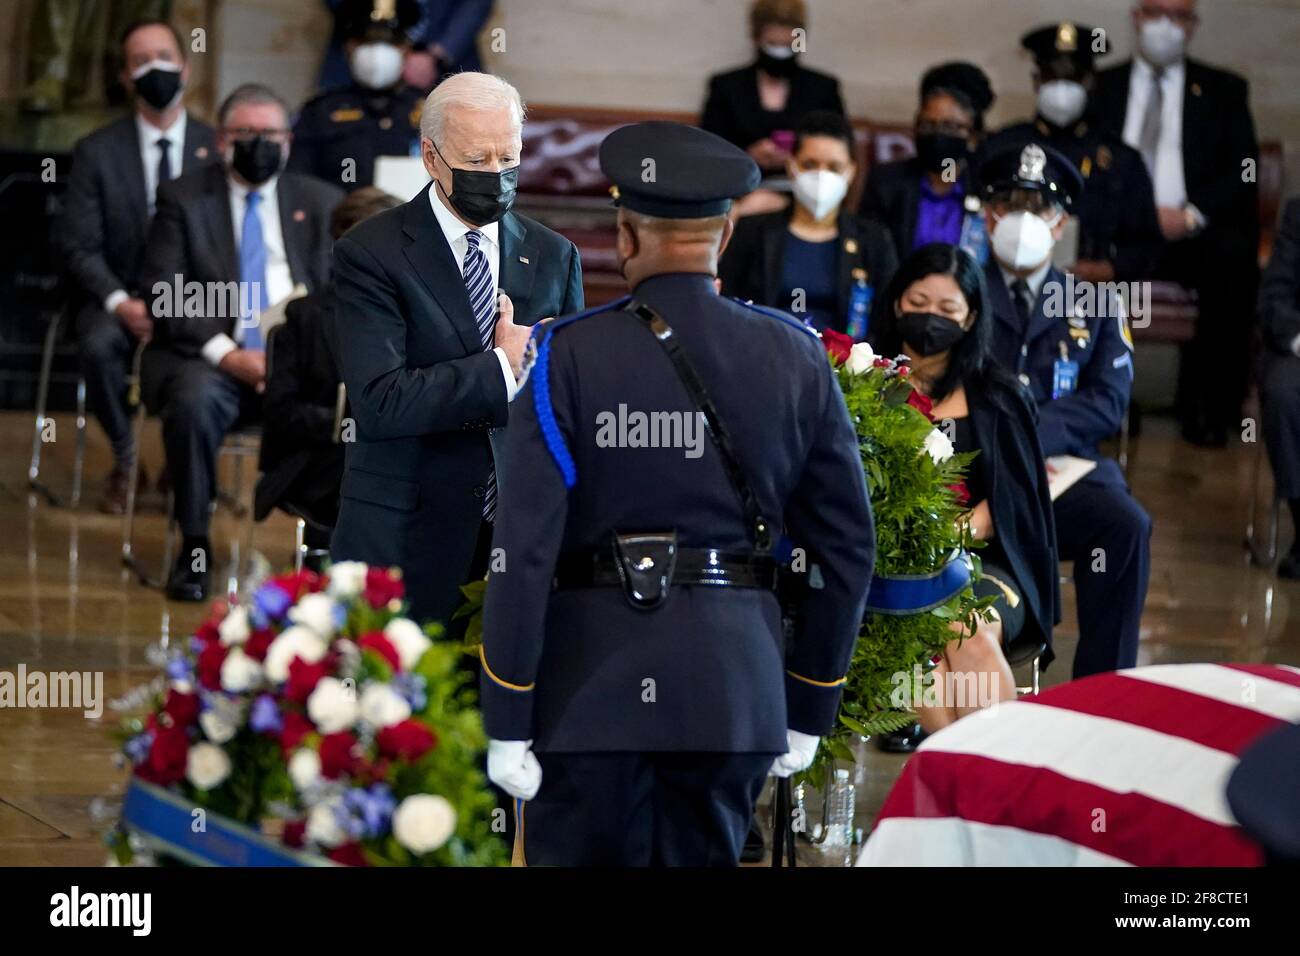 WASHINGTON, DC - APRIL 13: President Joe Biden pays his respects at the casket of the late U.S. Capitol Police officer William 'Billy' Evans during a memorial service as Evans lies in honor in the Rotunda at the U.S. Capitol on April 13, 2021 in Washington, DC. Officer Evans was killed in the line of duty during the attack outside the U.S. Capitol on April 2. He is the sixth Capitol Police officer to die in the line of duty in the nearly 200 years since the force was created. (Photo by Drew Angerer/Pool/Sipa USA) Stock Photo